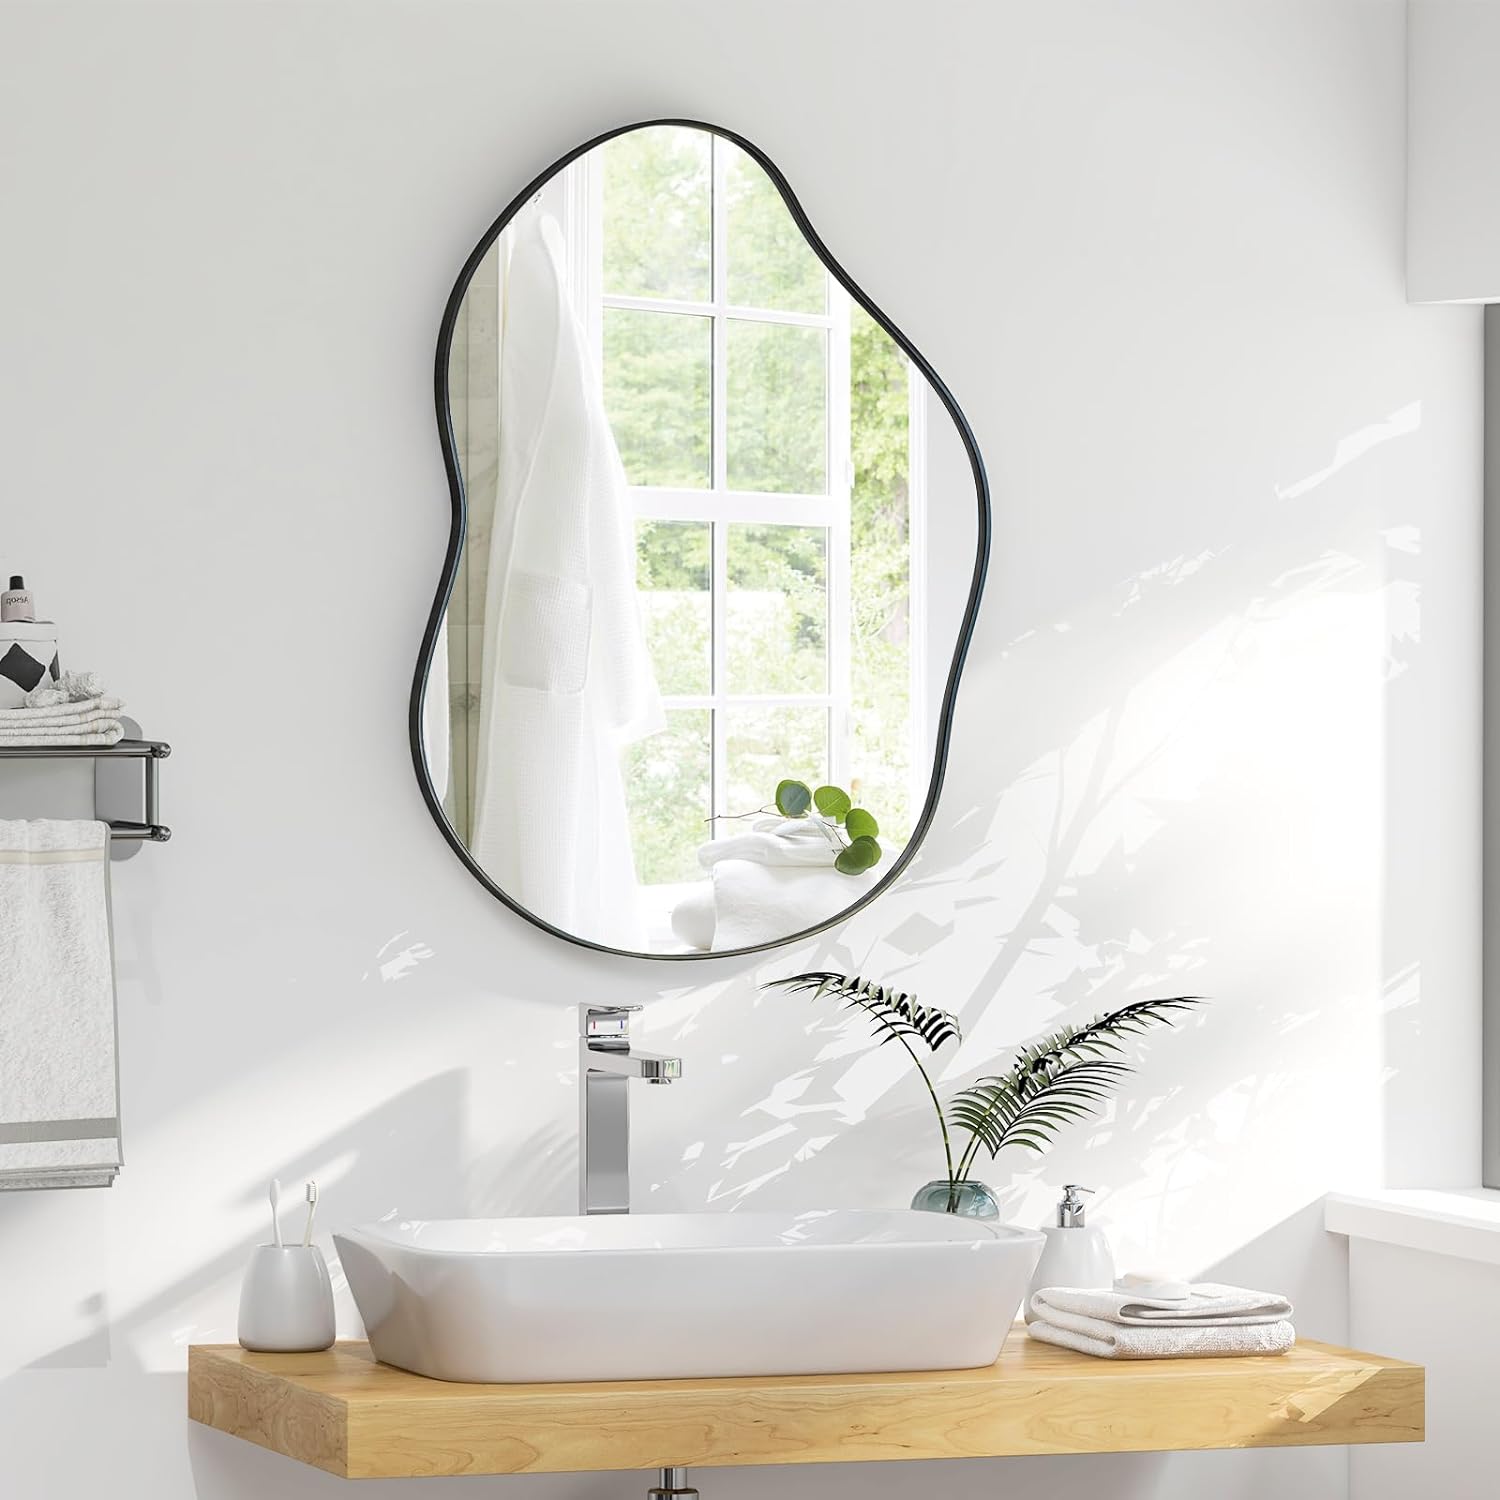 CHARMAID Irregular Wall Mirror, Asymmetrical Mirror Wall Mounted with Metal Frame and Wood Back Broad